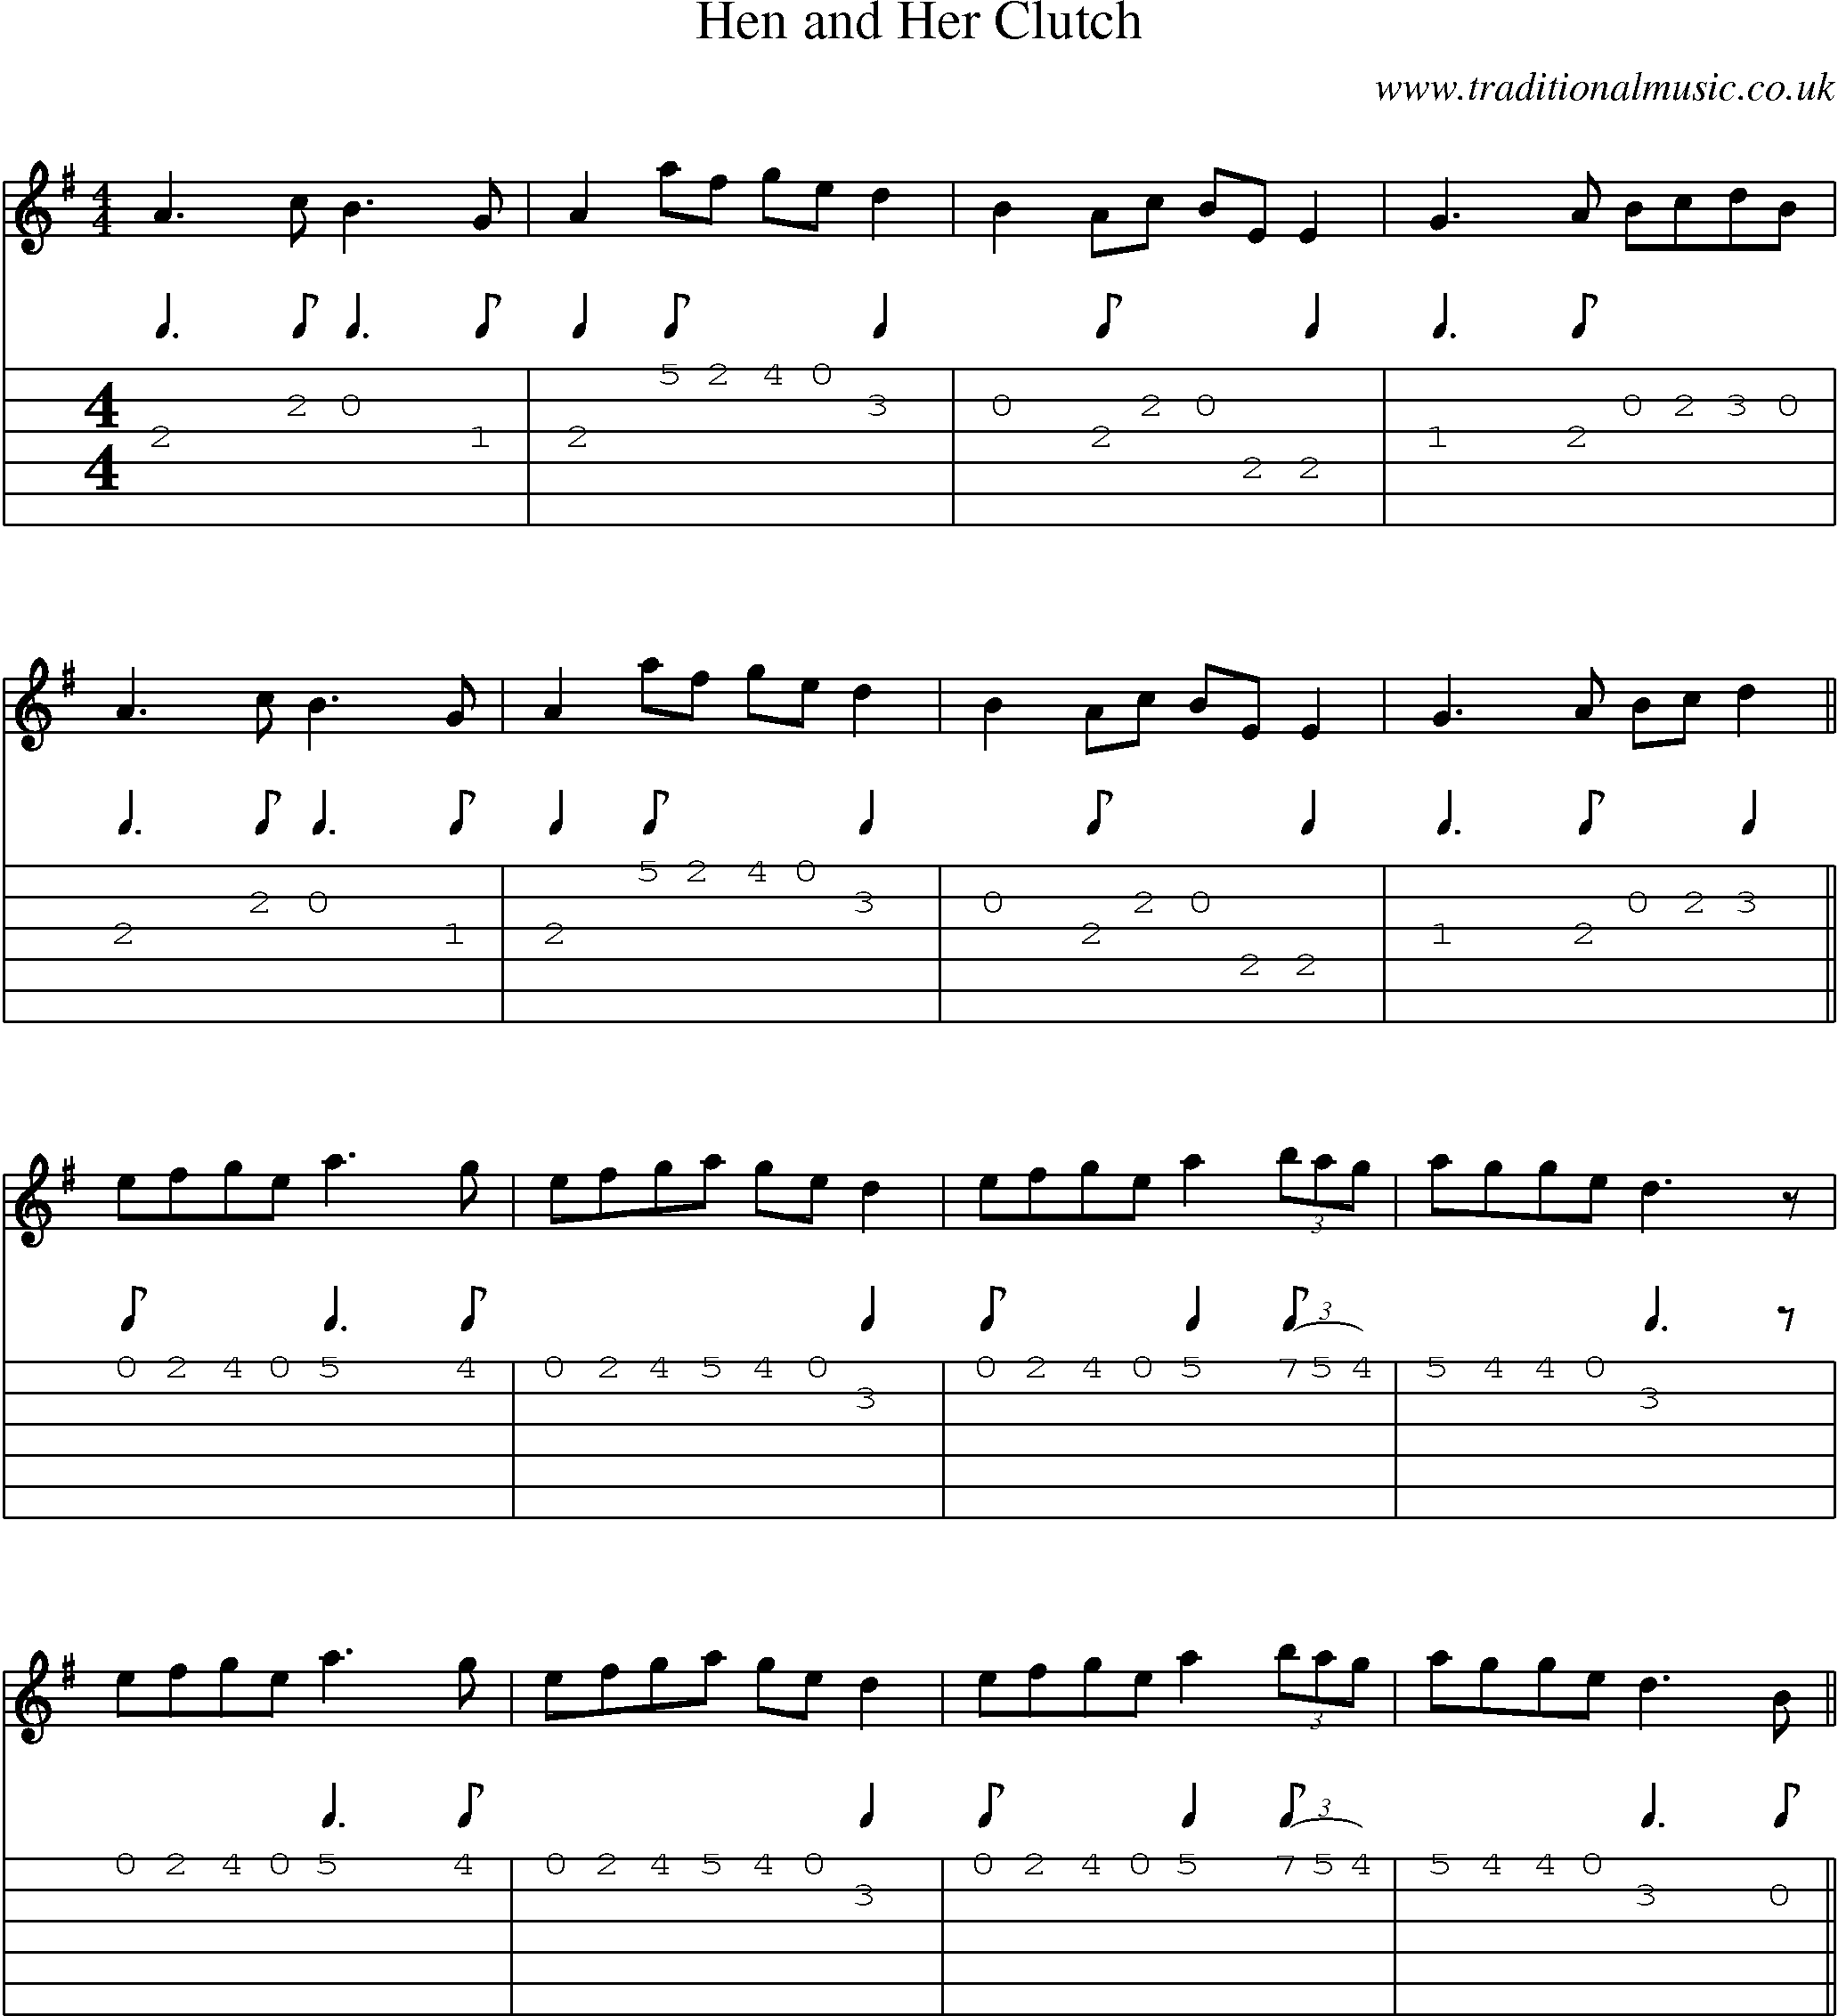 Music Score and Guitar Tabs for Hen And Her Clutch